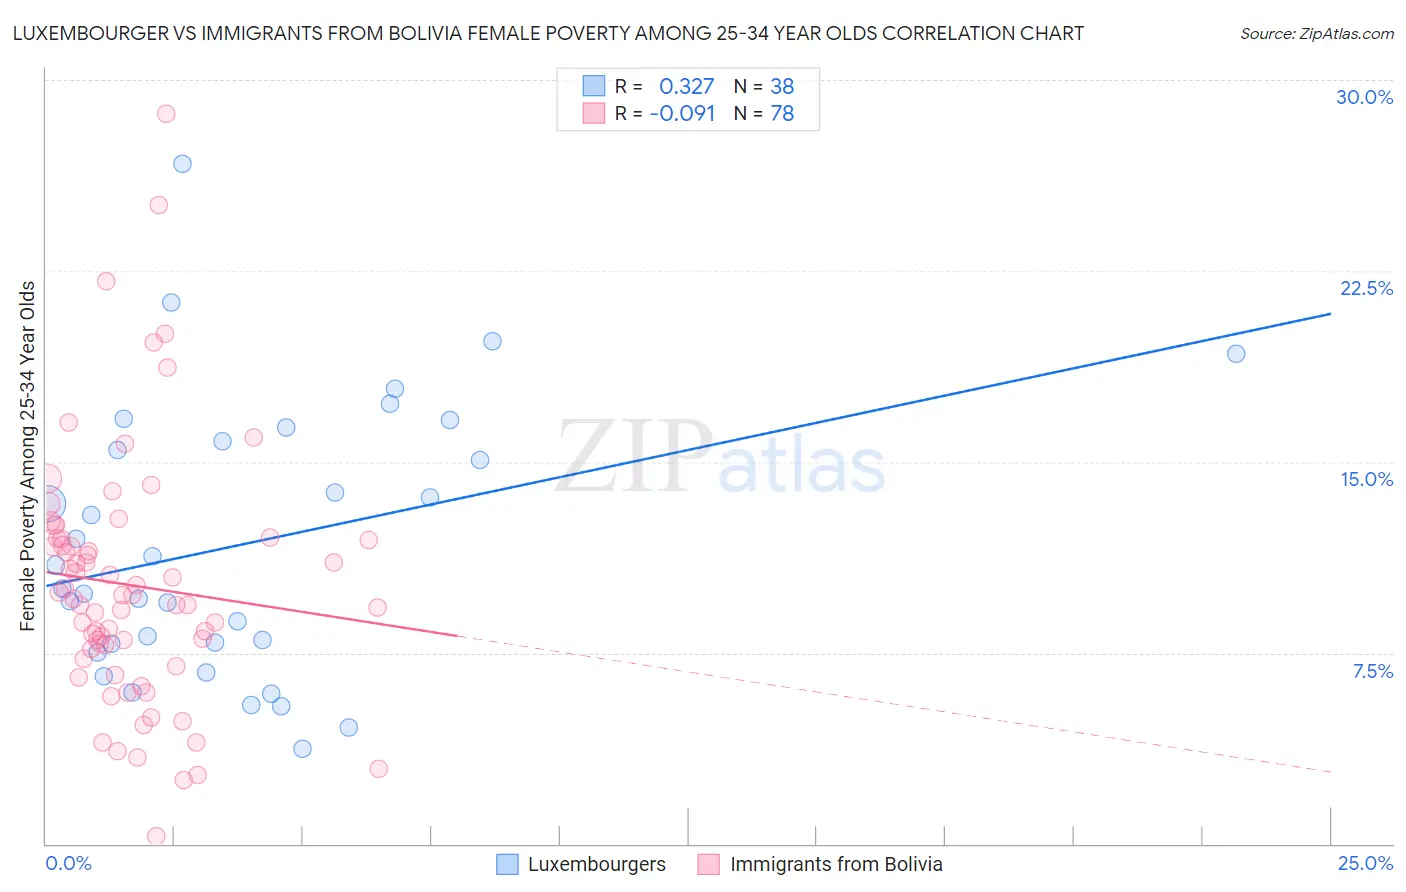 Luxembourger vs Immigrants from Bolivia Female Poverty Among 25-34 Year Olds